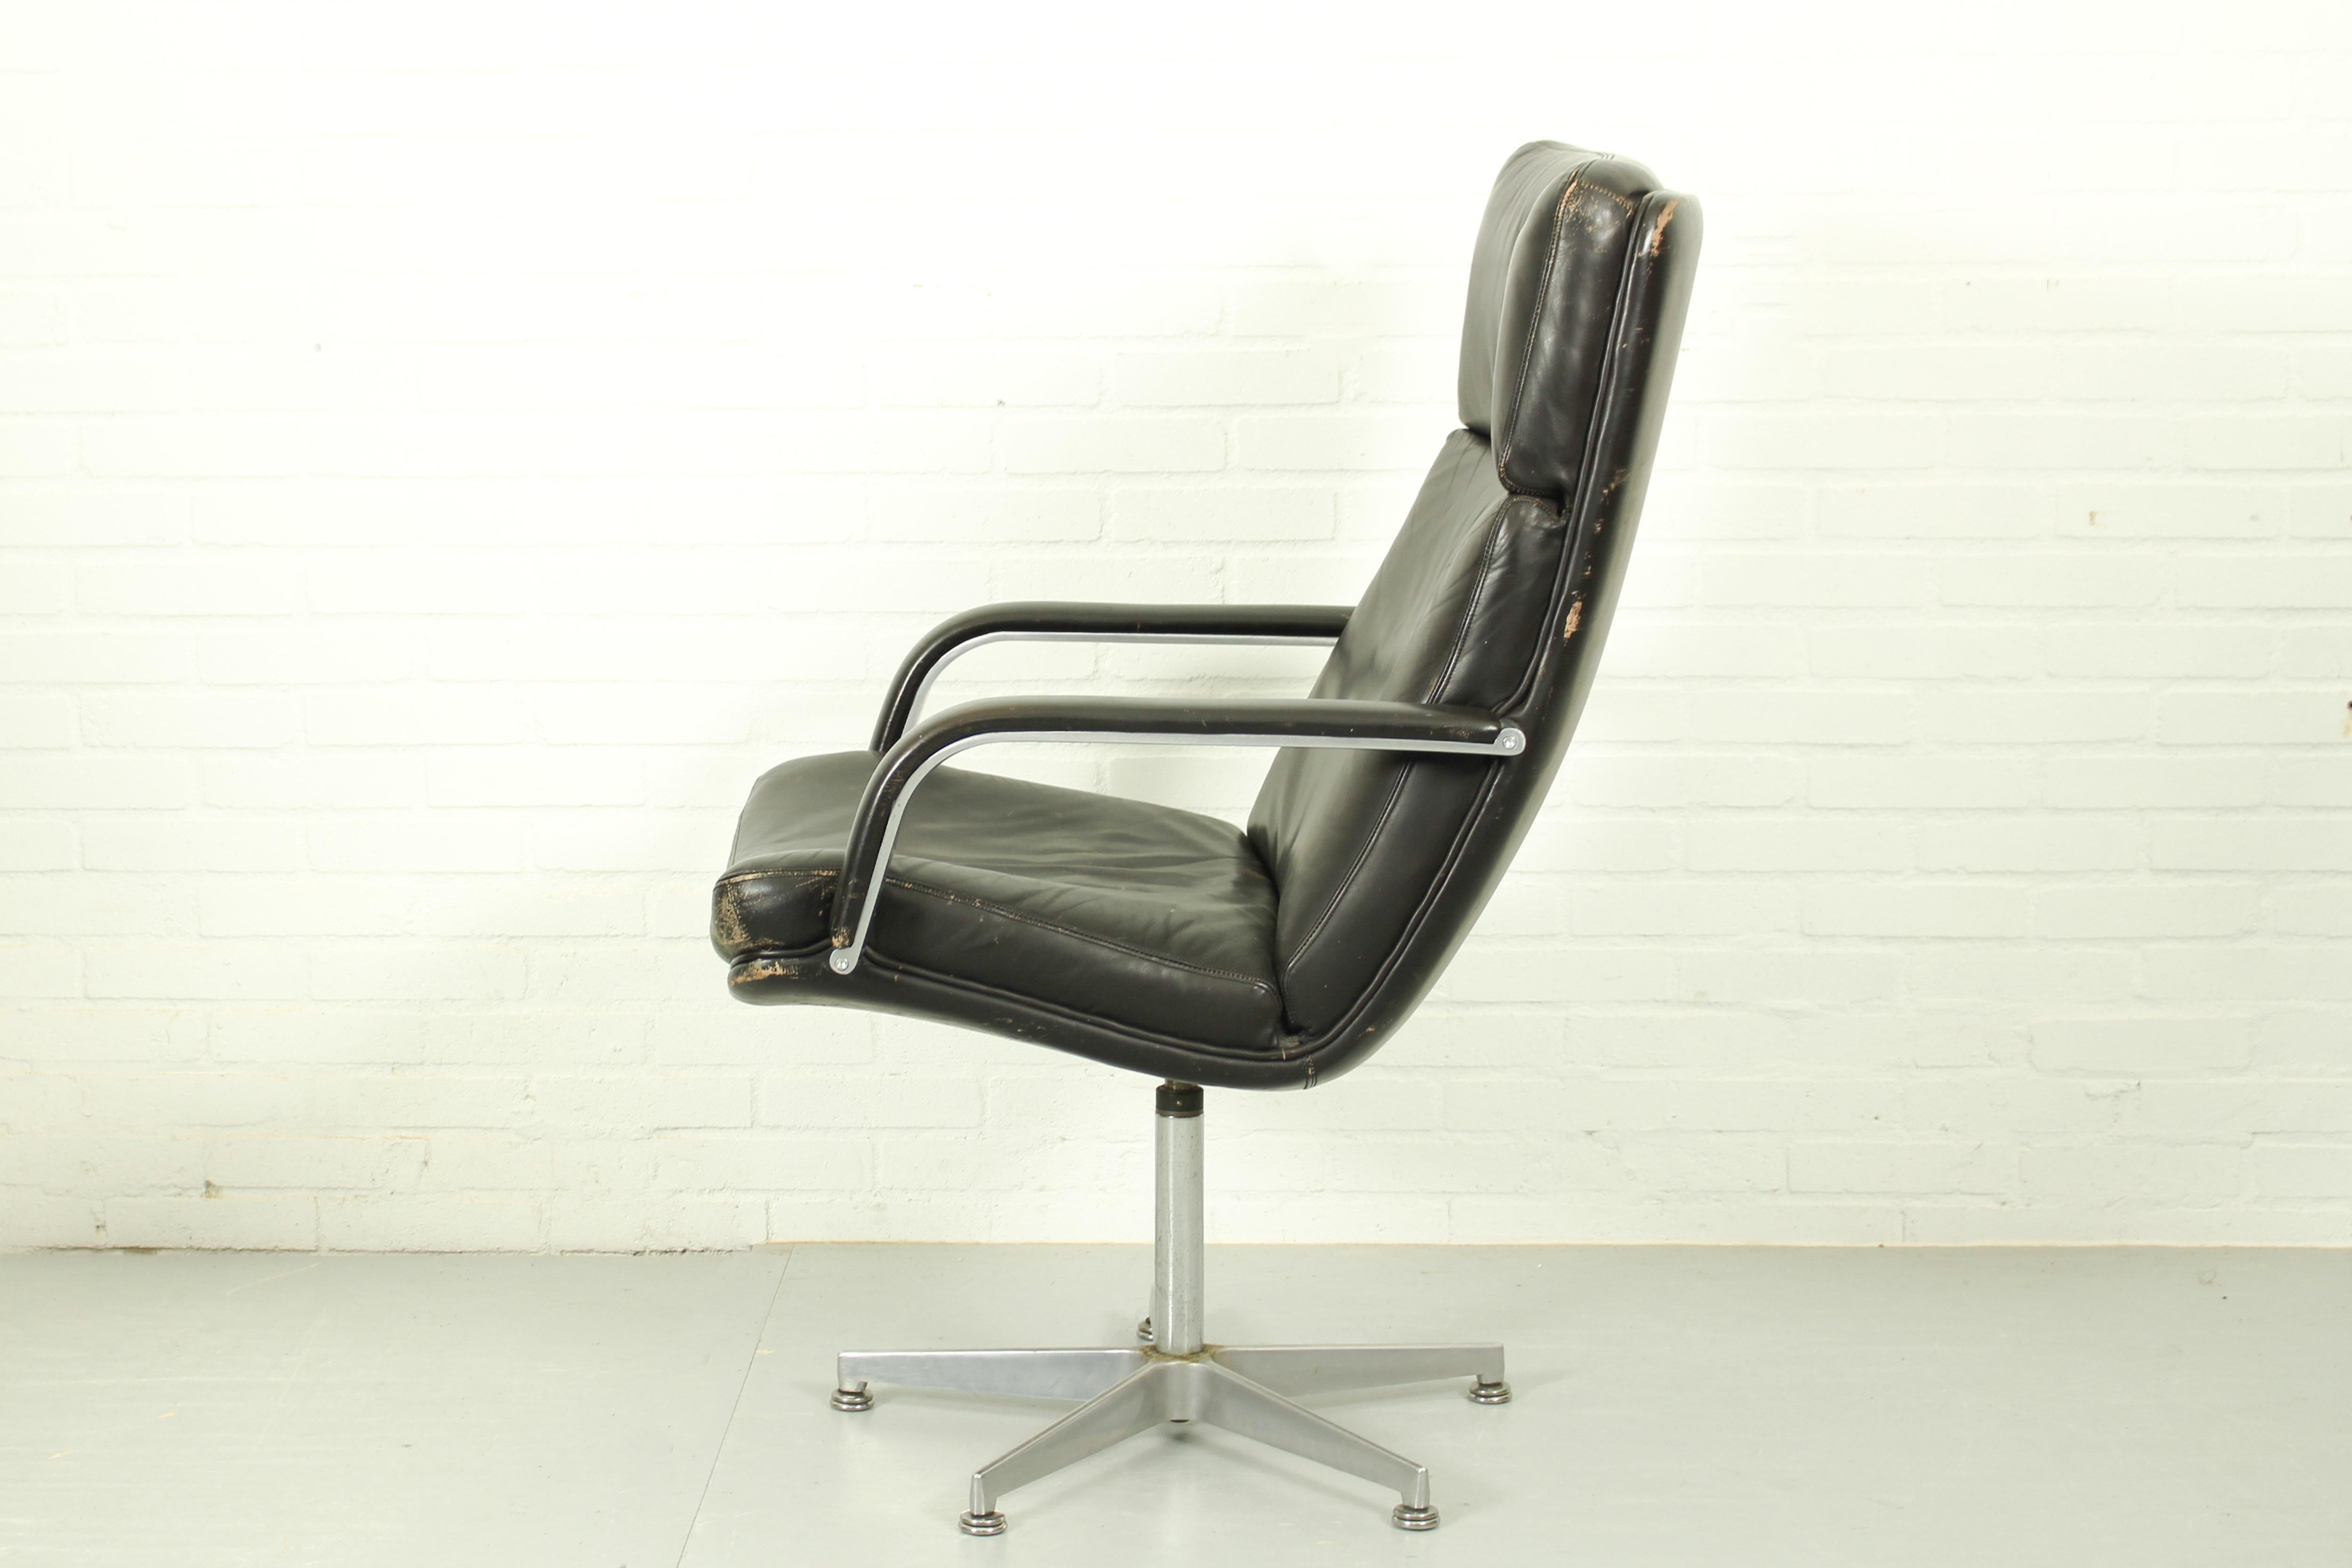 A Vintage executive-style black leather chair, with a special polished vintage chrome base. This chair, was designed by Geoffrey Harcourt for 